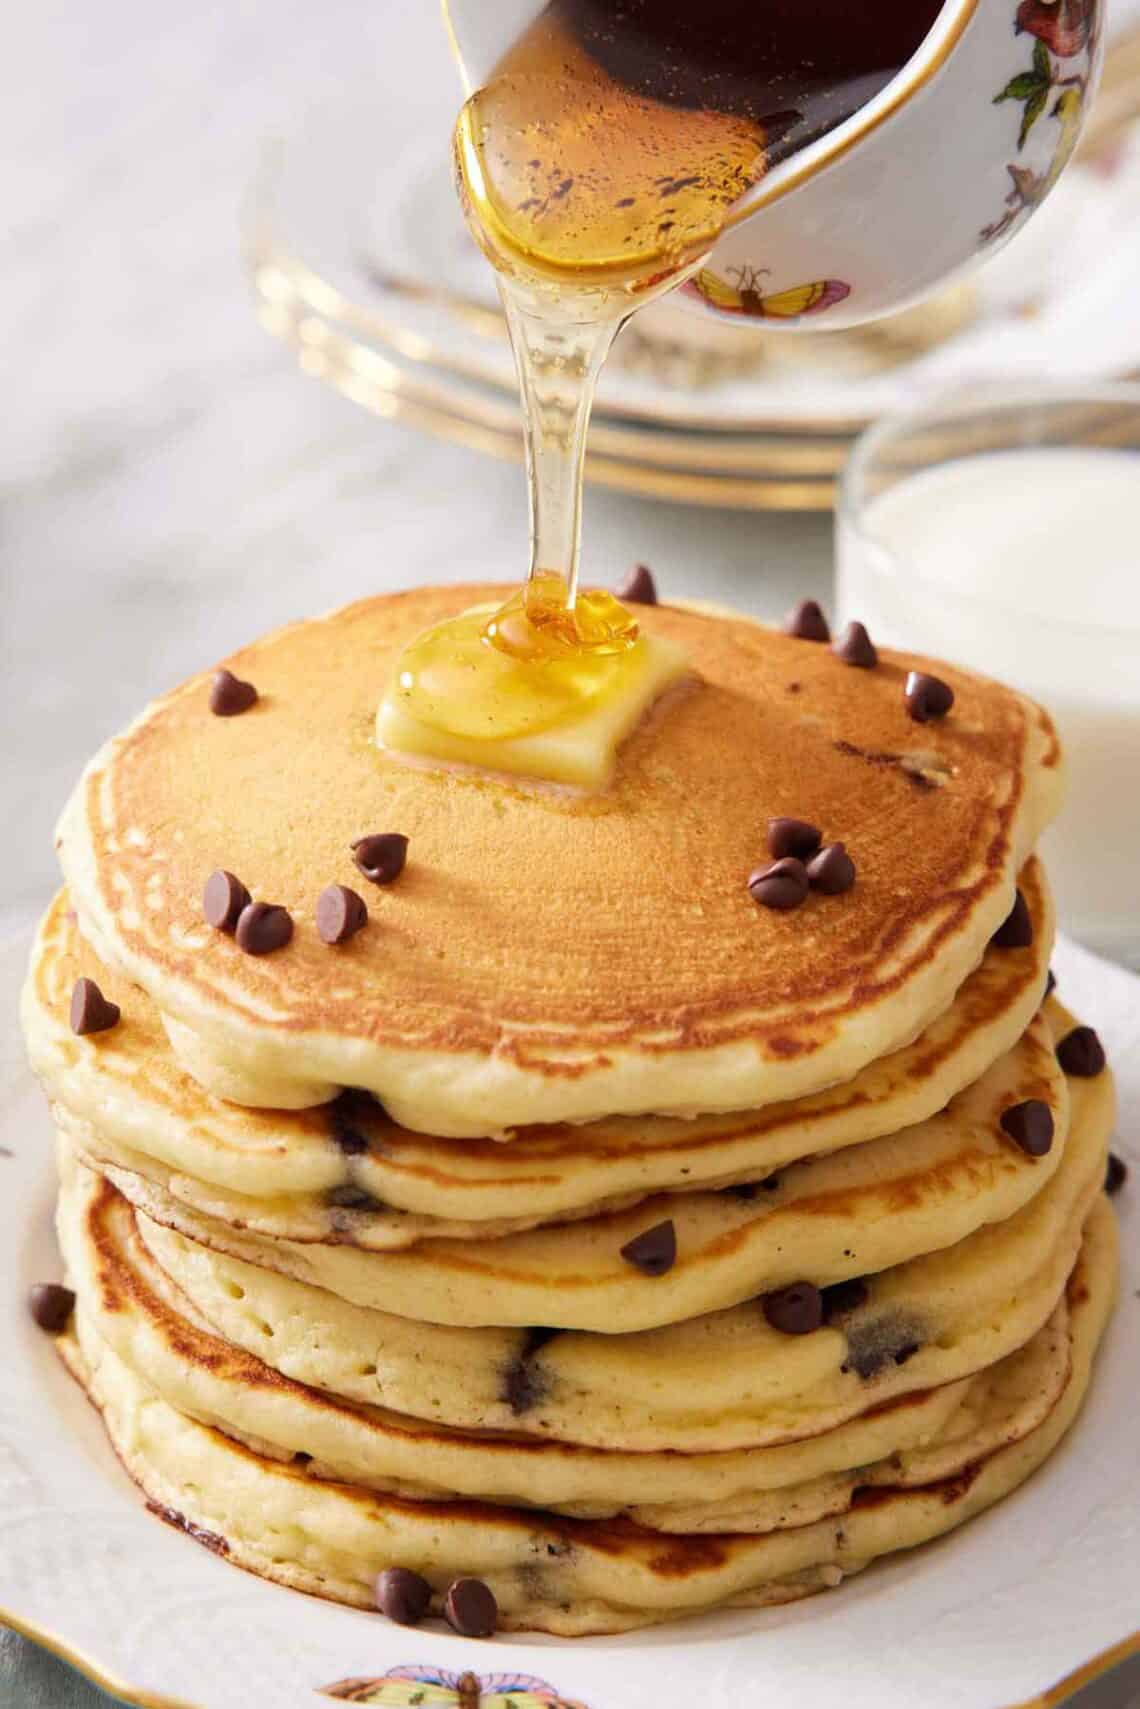 Syrup poured over a stack of chocolate chip pancakes with butter.